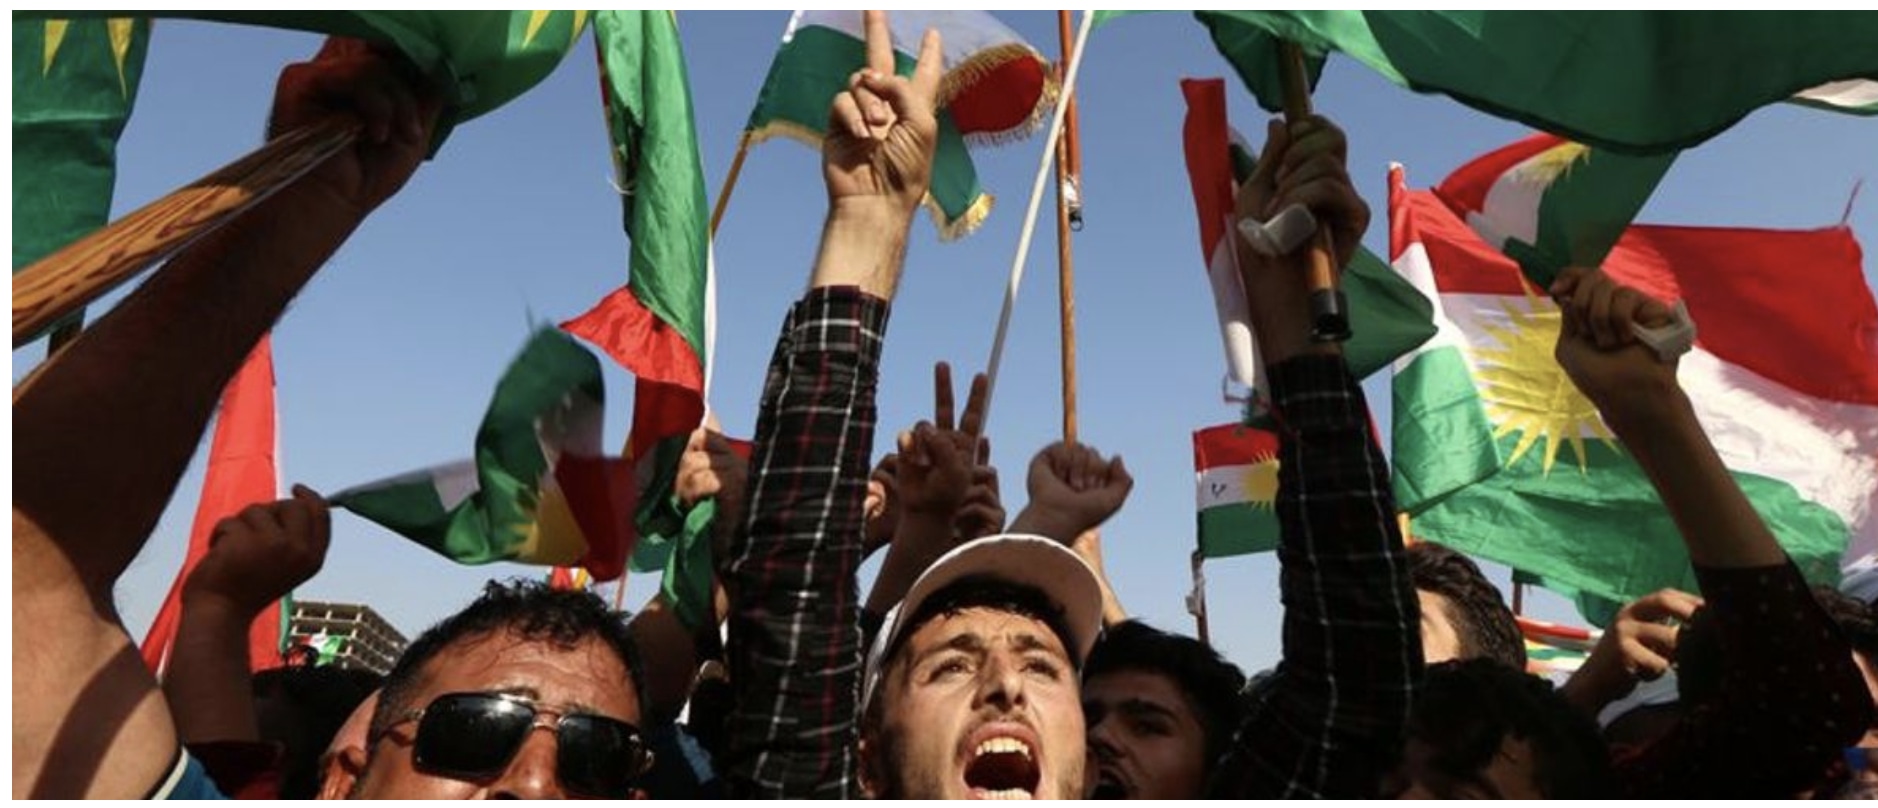 The “second Israel” dream: Kurdistan and 21st century secessions